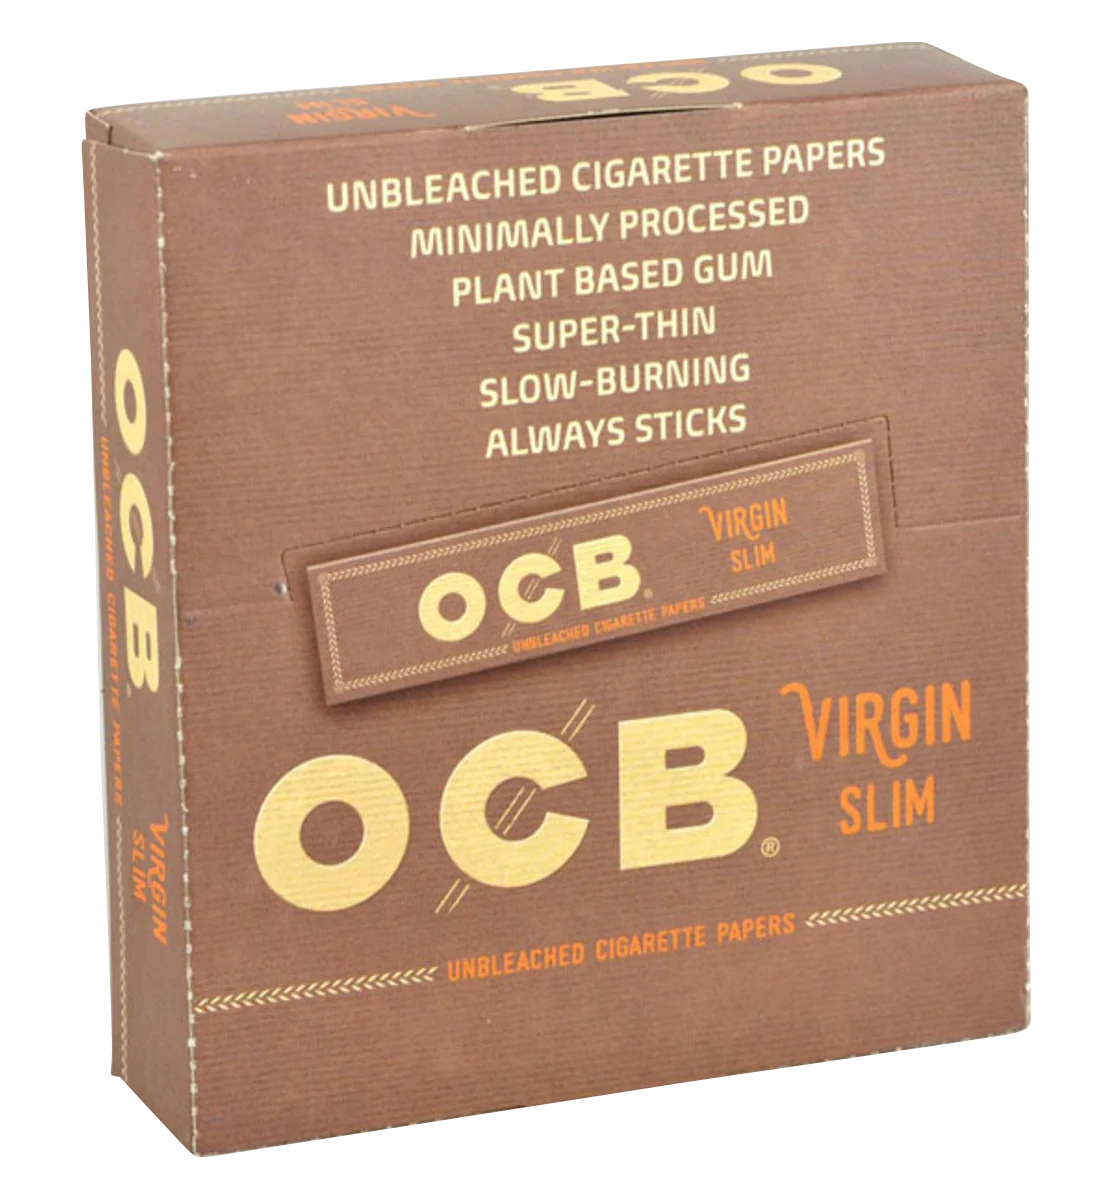 OCB Virgin Kingsize Slim Rolling Papers 24 Pack, ultra-thin and unbleached, front view